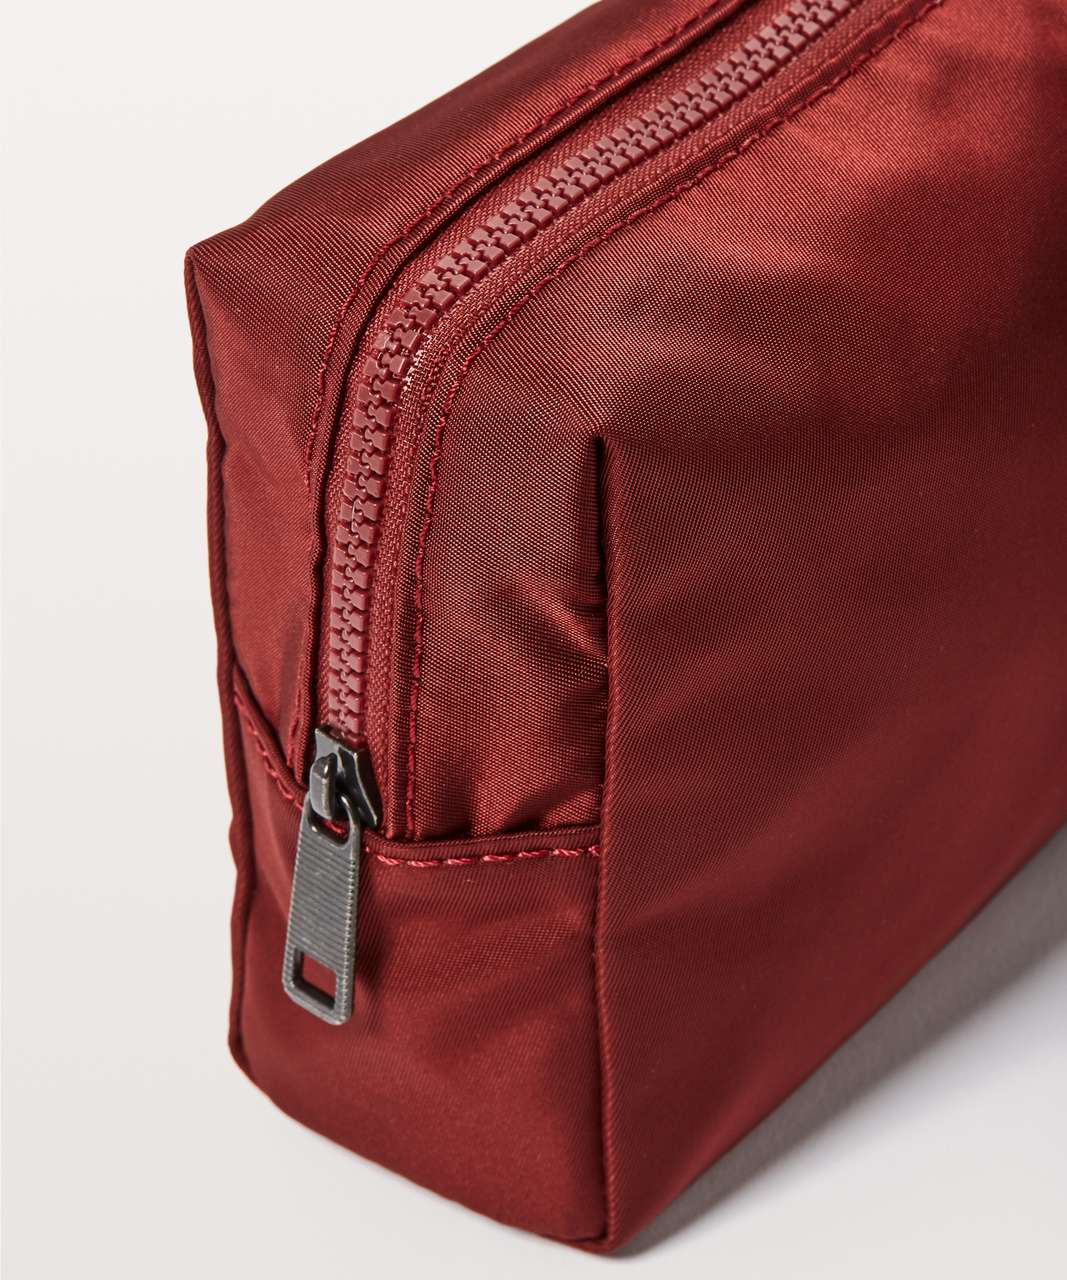 Lululemon All Your Small Things Pouch *Mini 2L - Roman Red